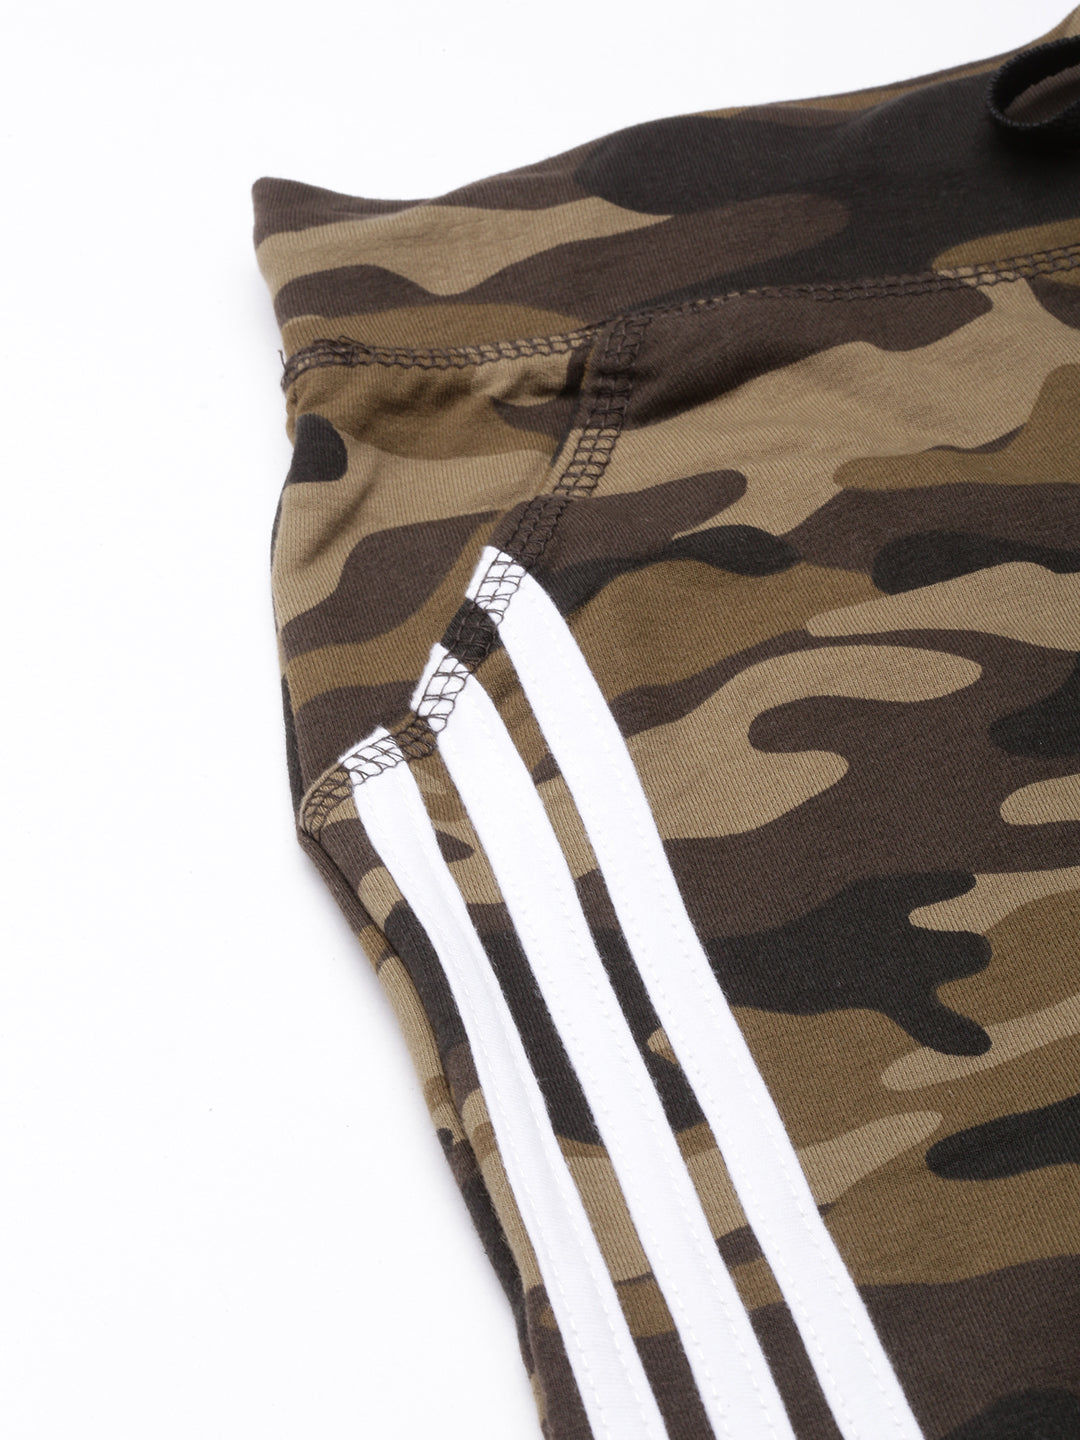 Women Camouflage Slim Fit Olive Track Pant